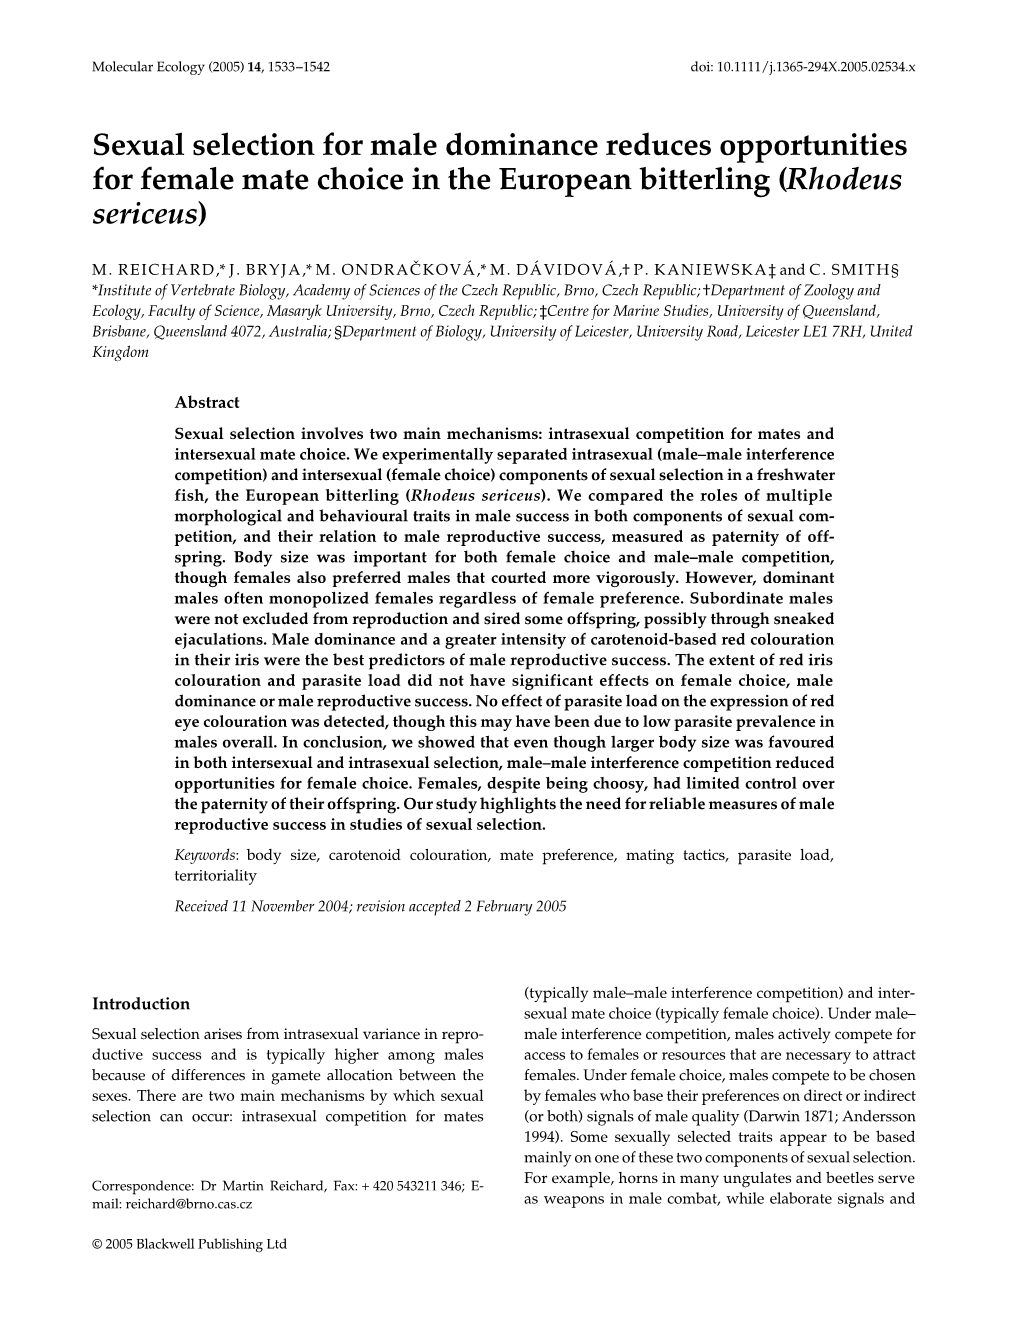 Sexual Selection for Male Dominance Reduces Opportunities for Female Mate Choice in the European Bitterling (Rhodeus Sericeus)